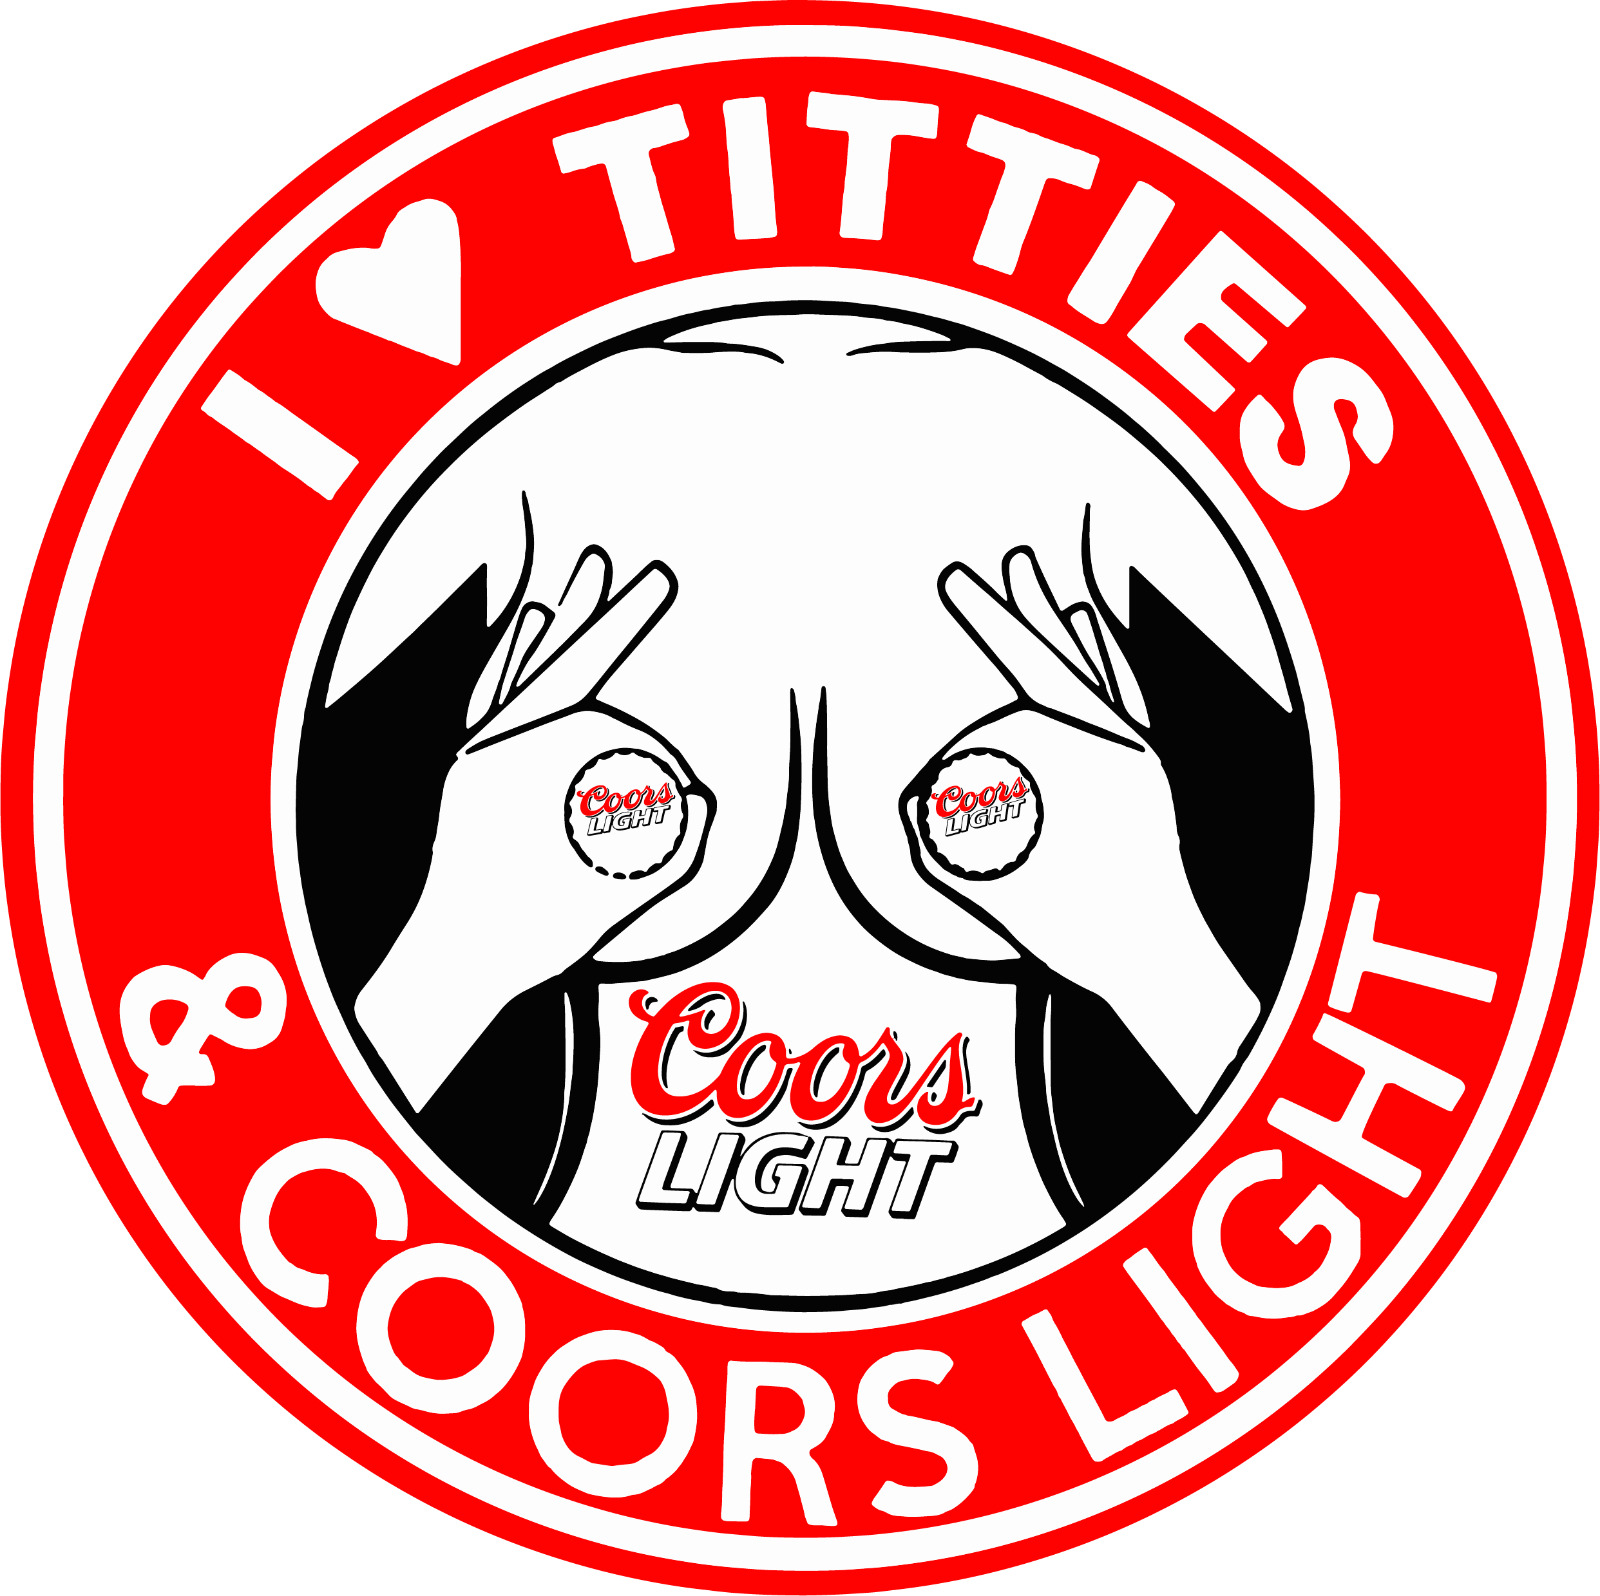 I Love Titties and Coors Light. Decal printed on white vinyl. for